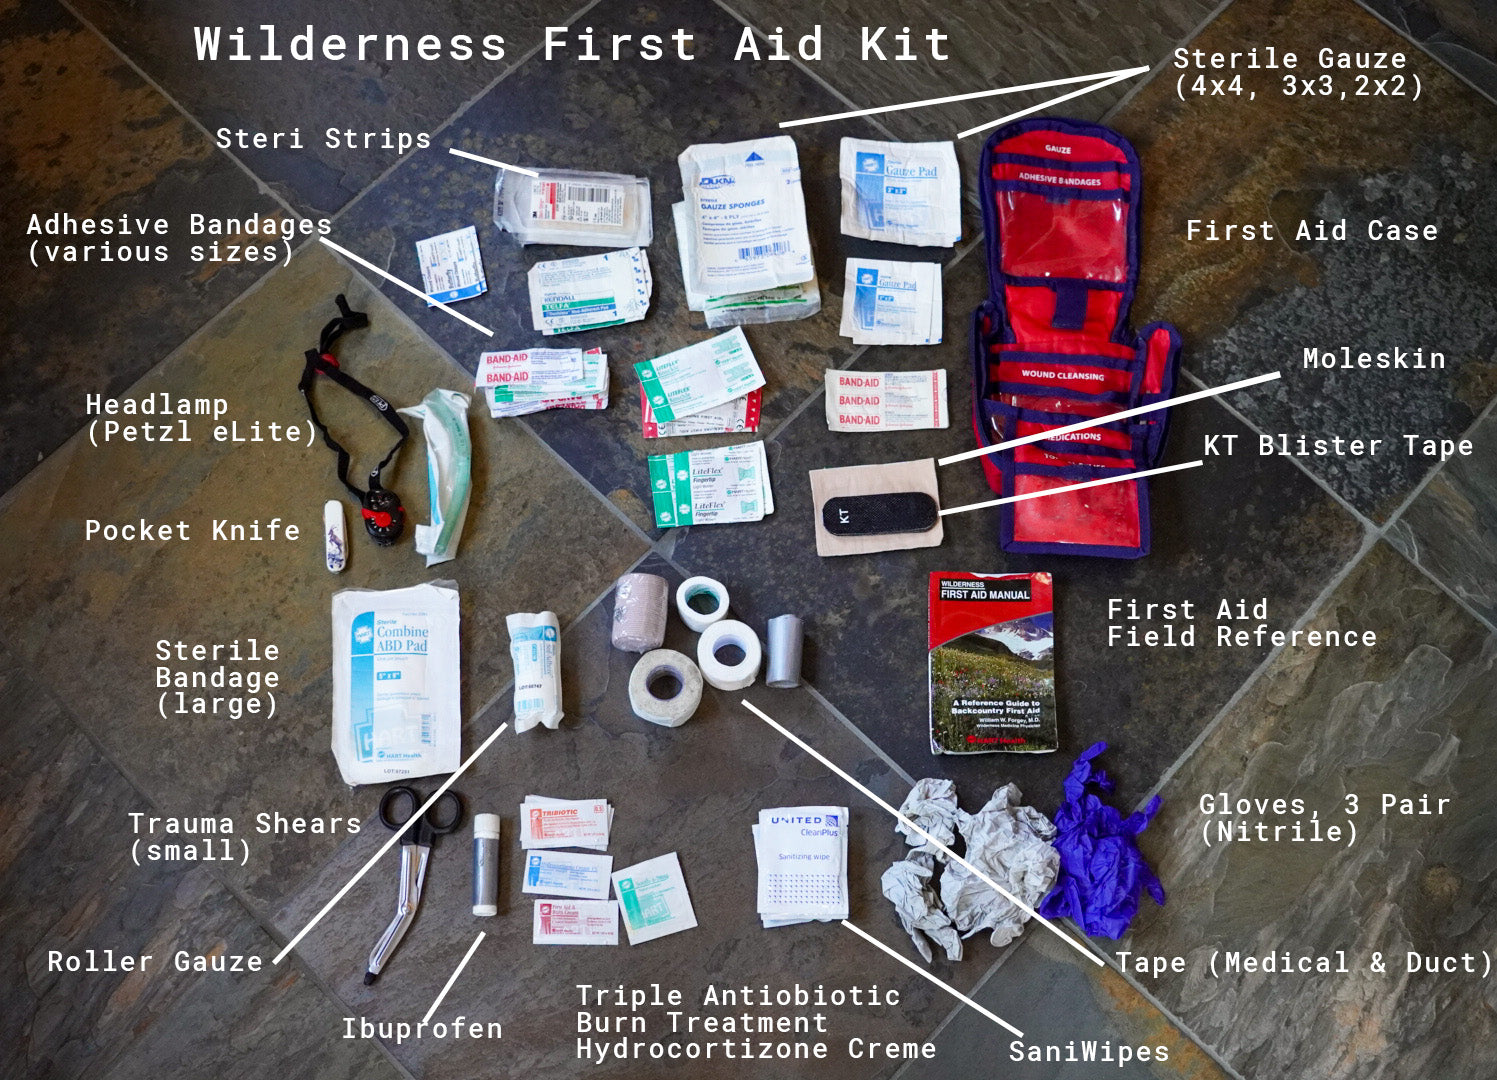 Wilderness First Aid Kit for Backcountry Skiers with Contents Labelled